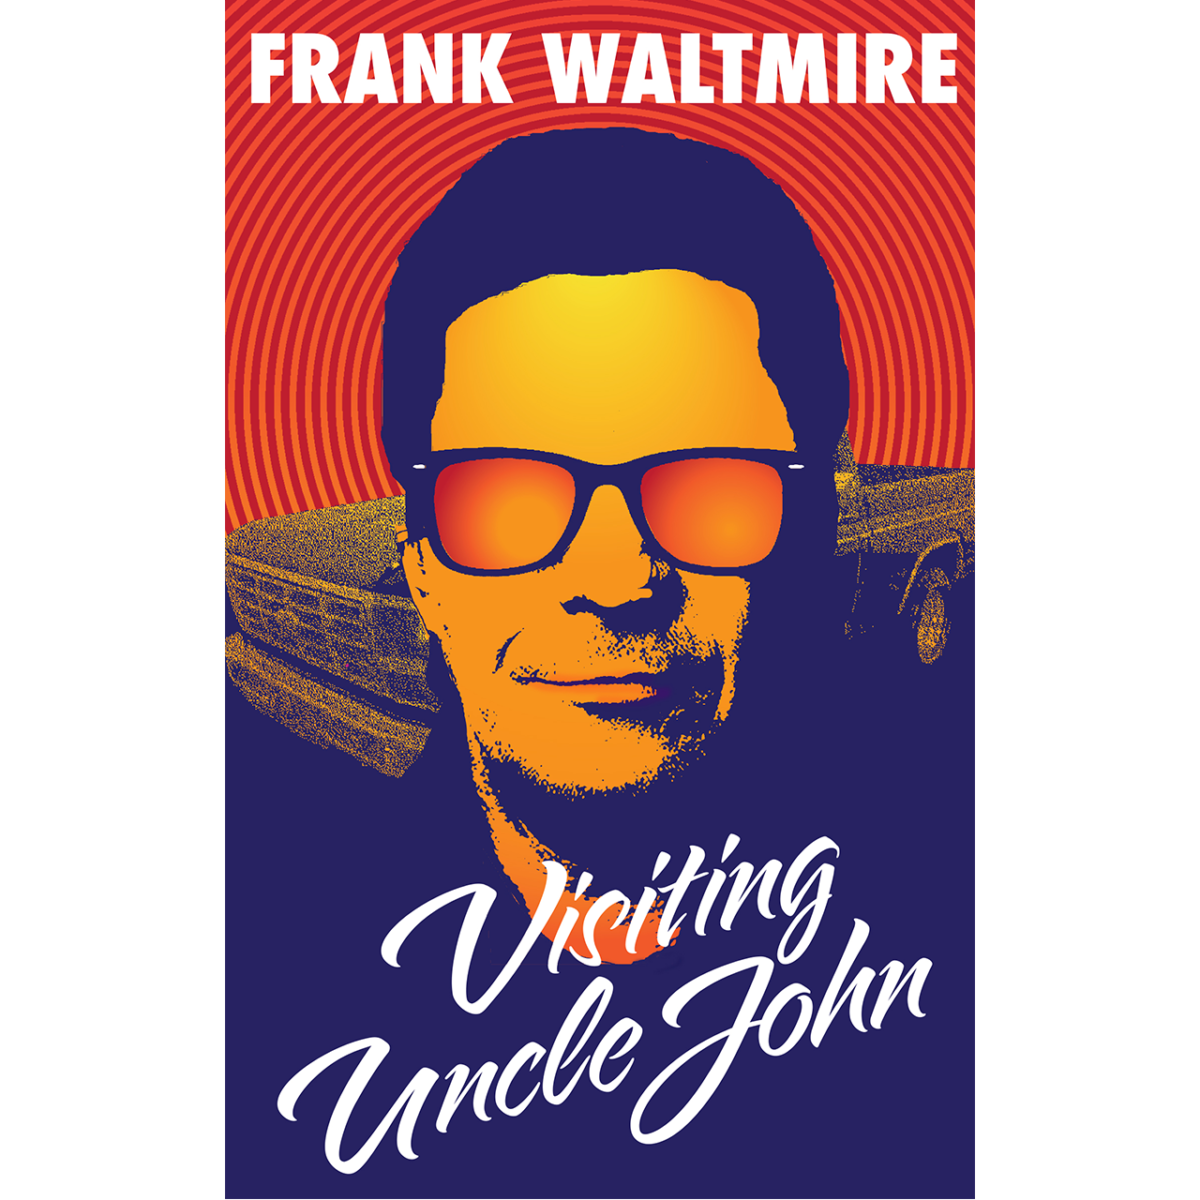 Visiting Uncle John by Frank Waltmire